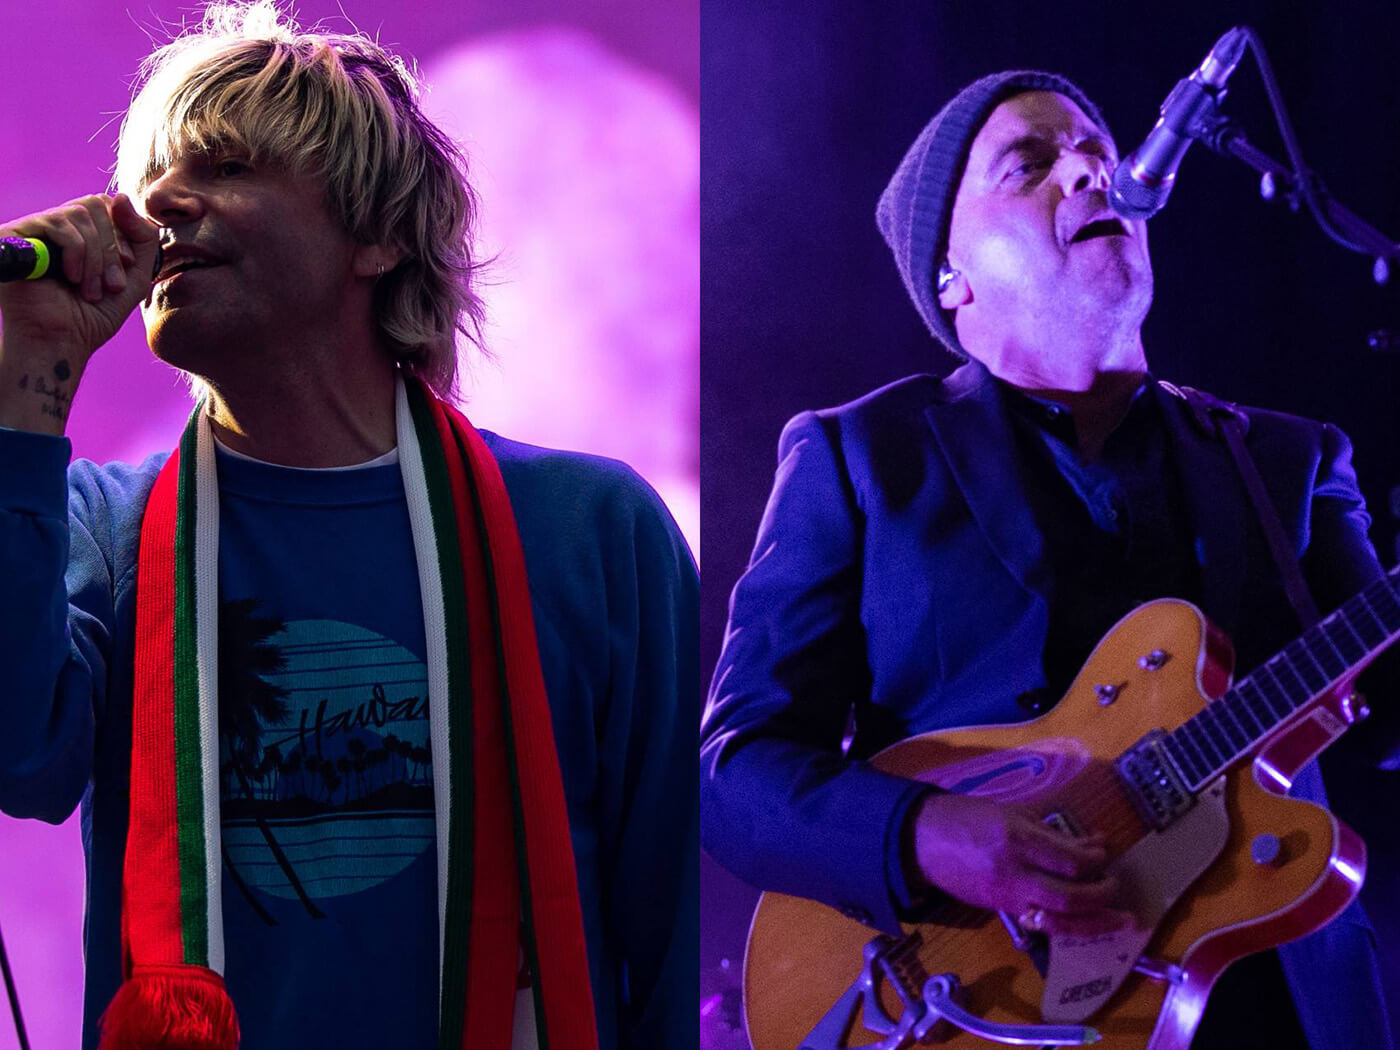 The Charlatans and Ride team up for North American co-headline tour